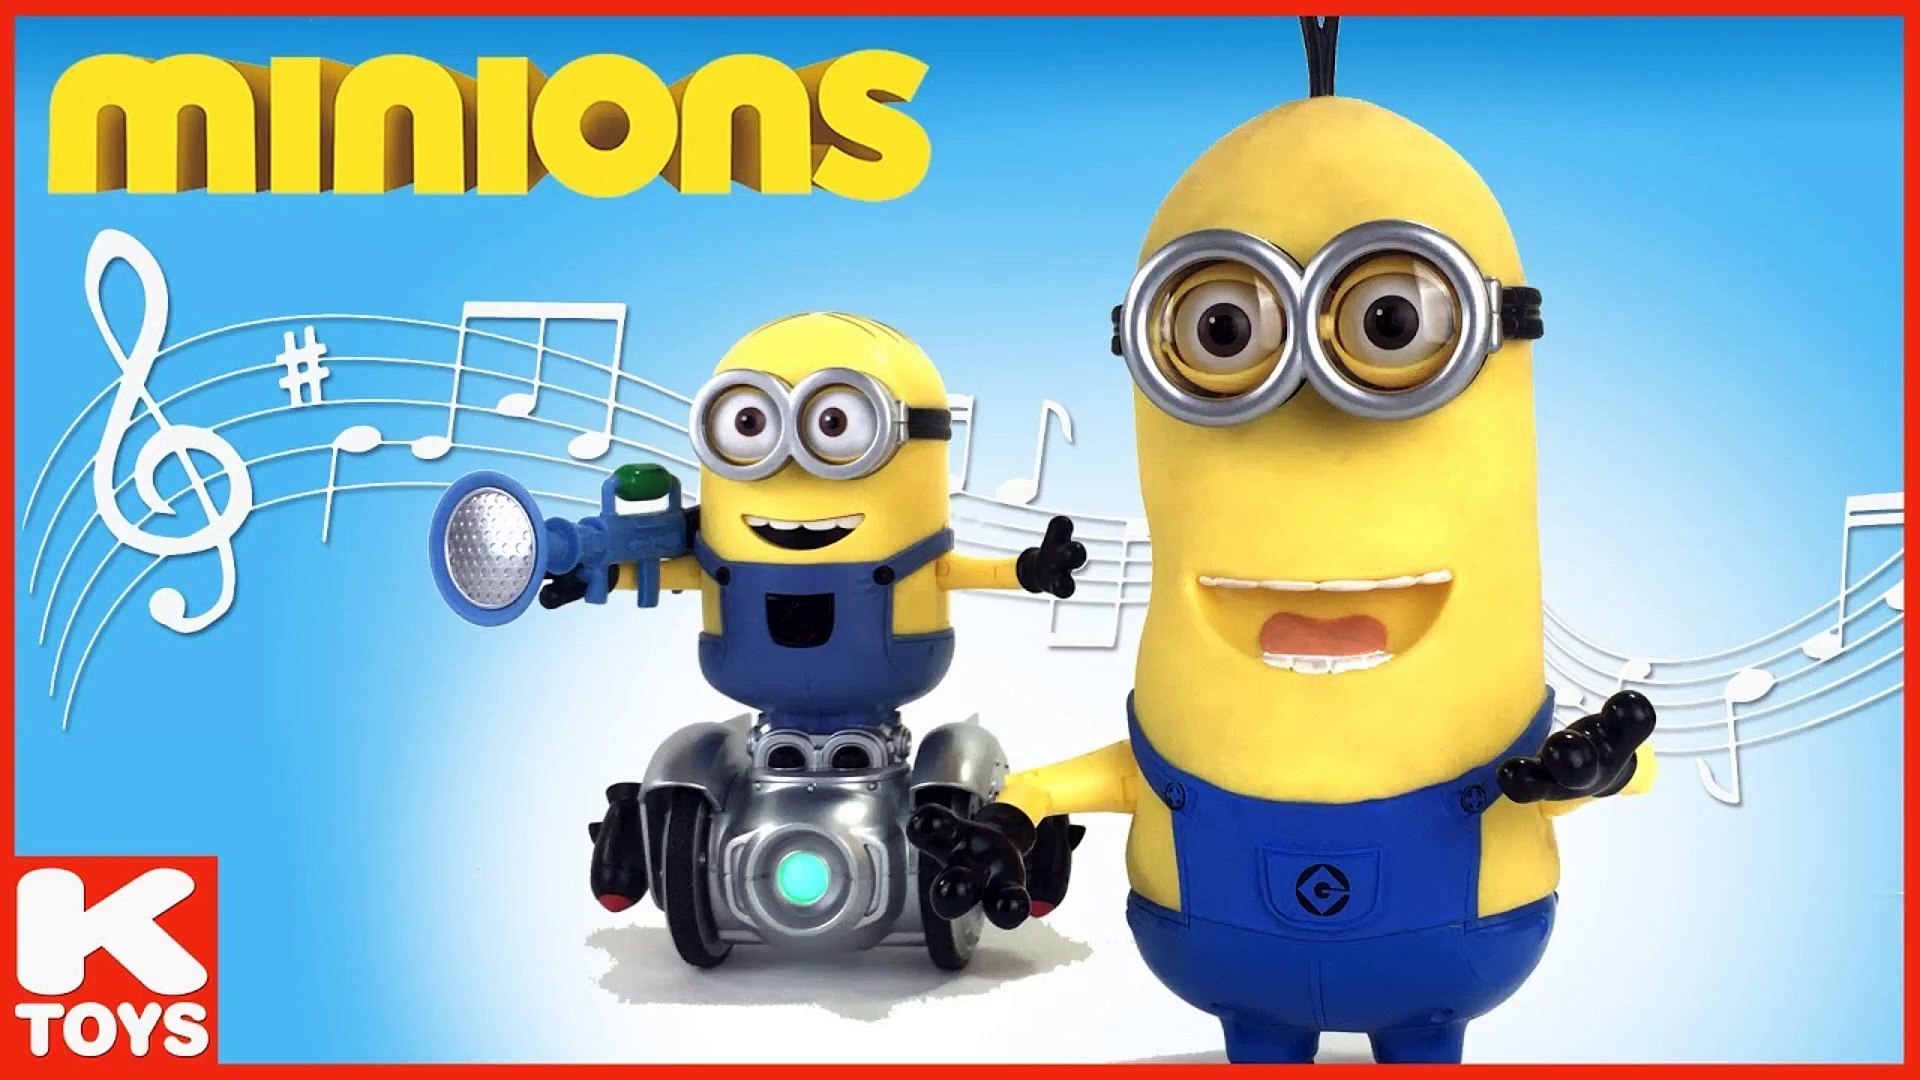 Minions - Singing and Talking Tim with Turbo Dave from Despicable